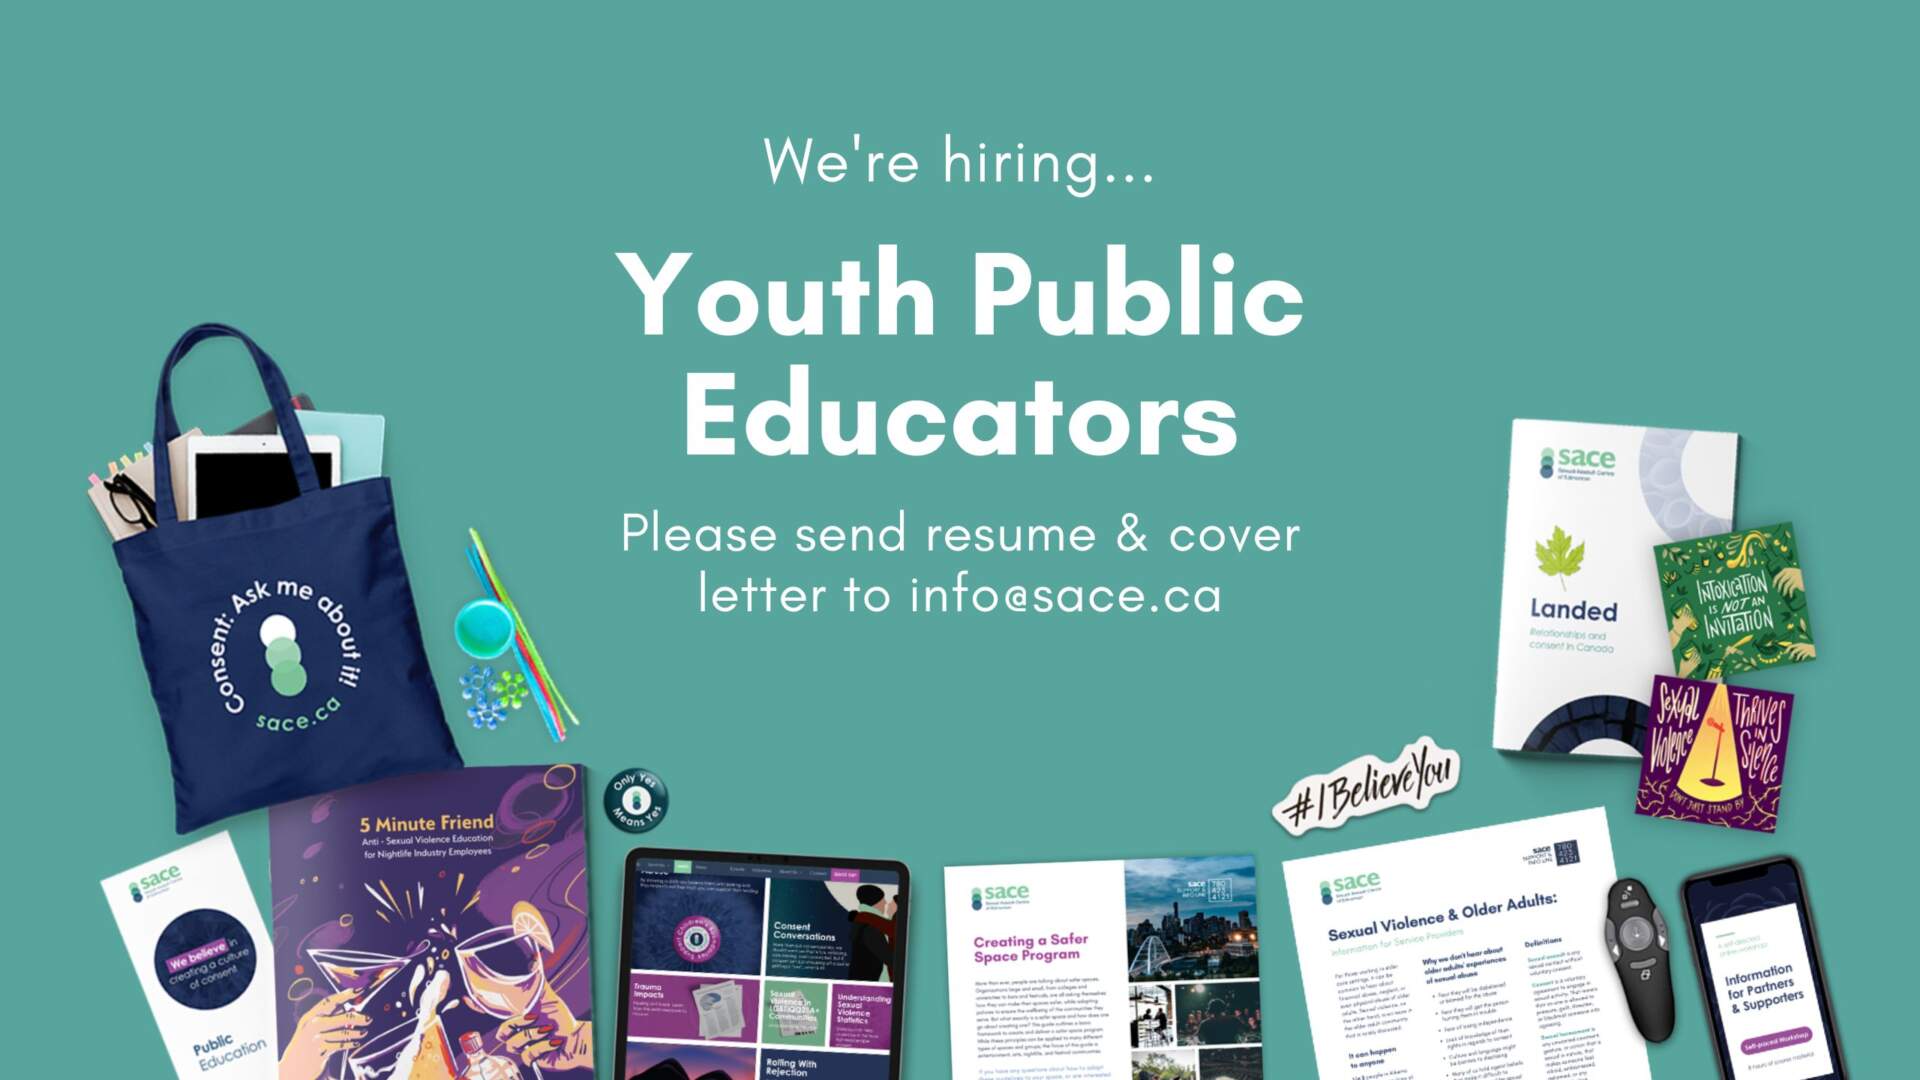 Green background with different education materials, and text that says We're hiring Youth Public Educators